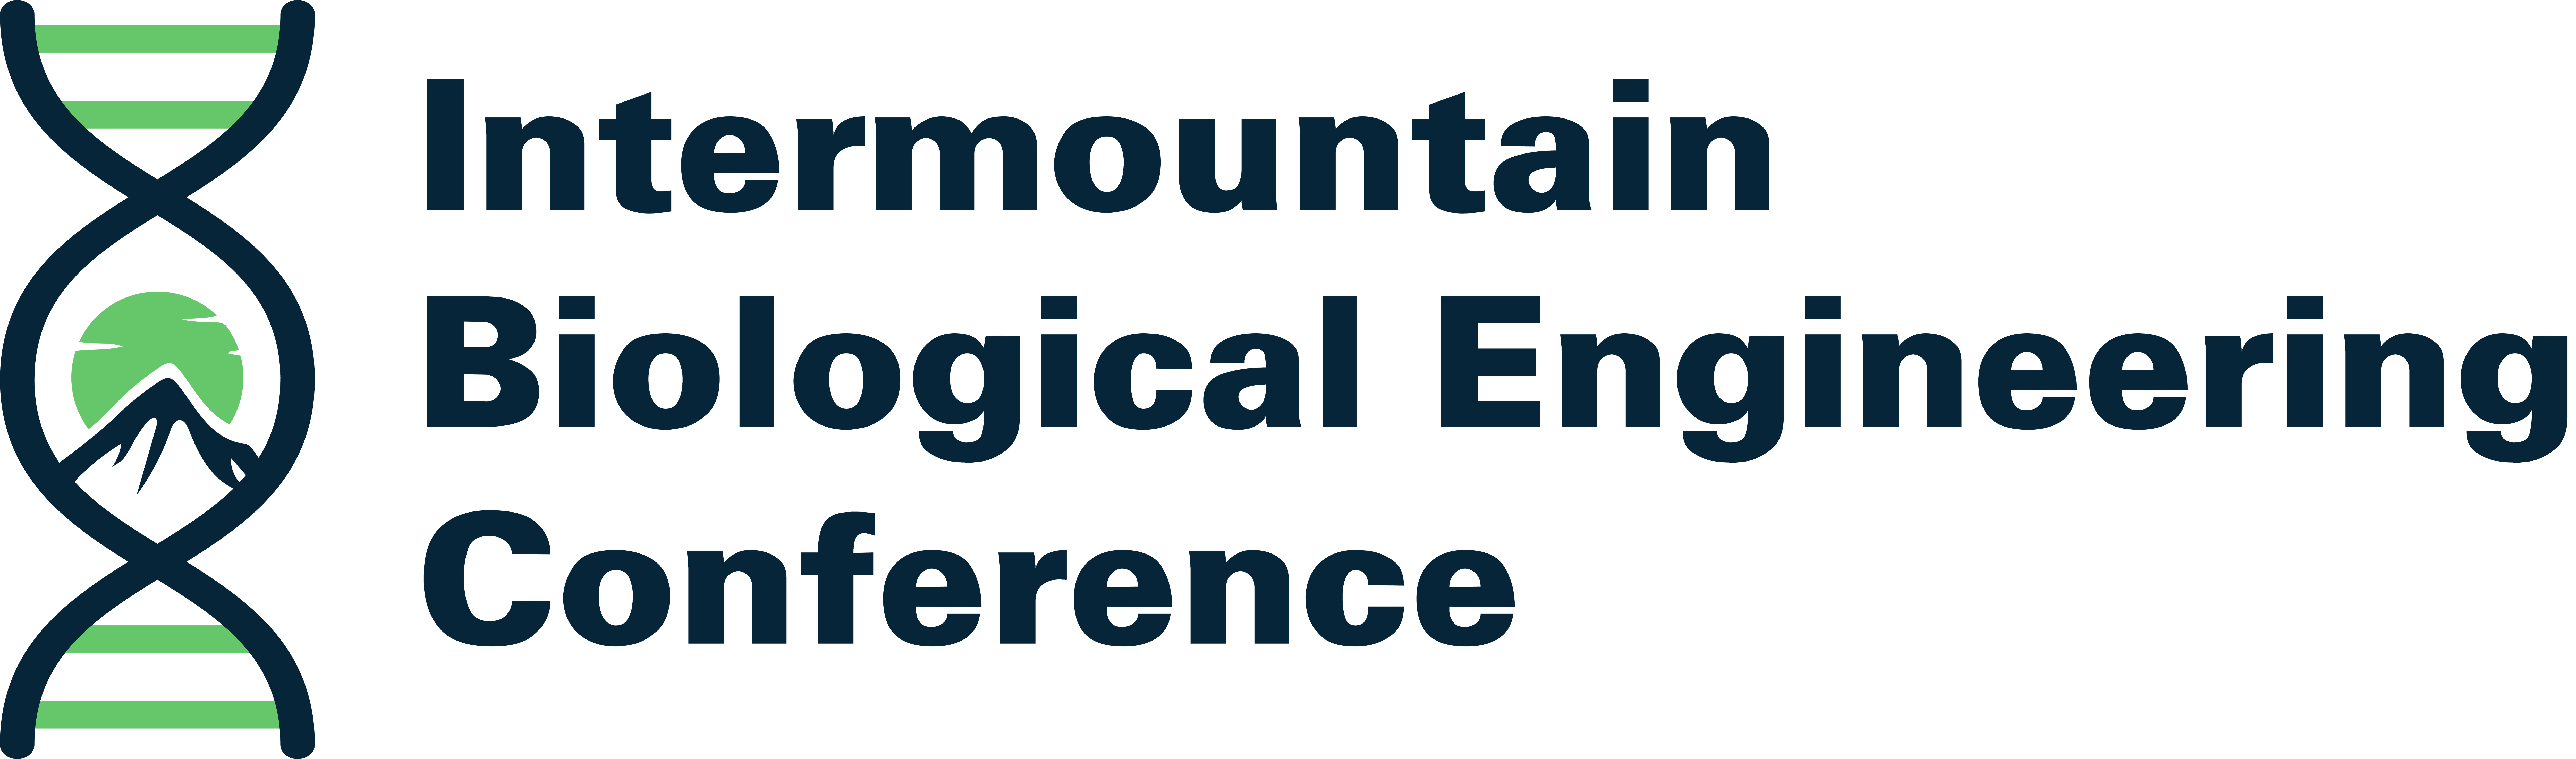 Intermountain Biological Engineering Conference